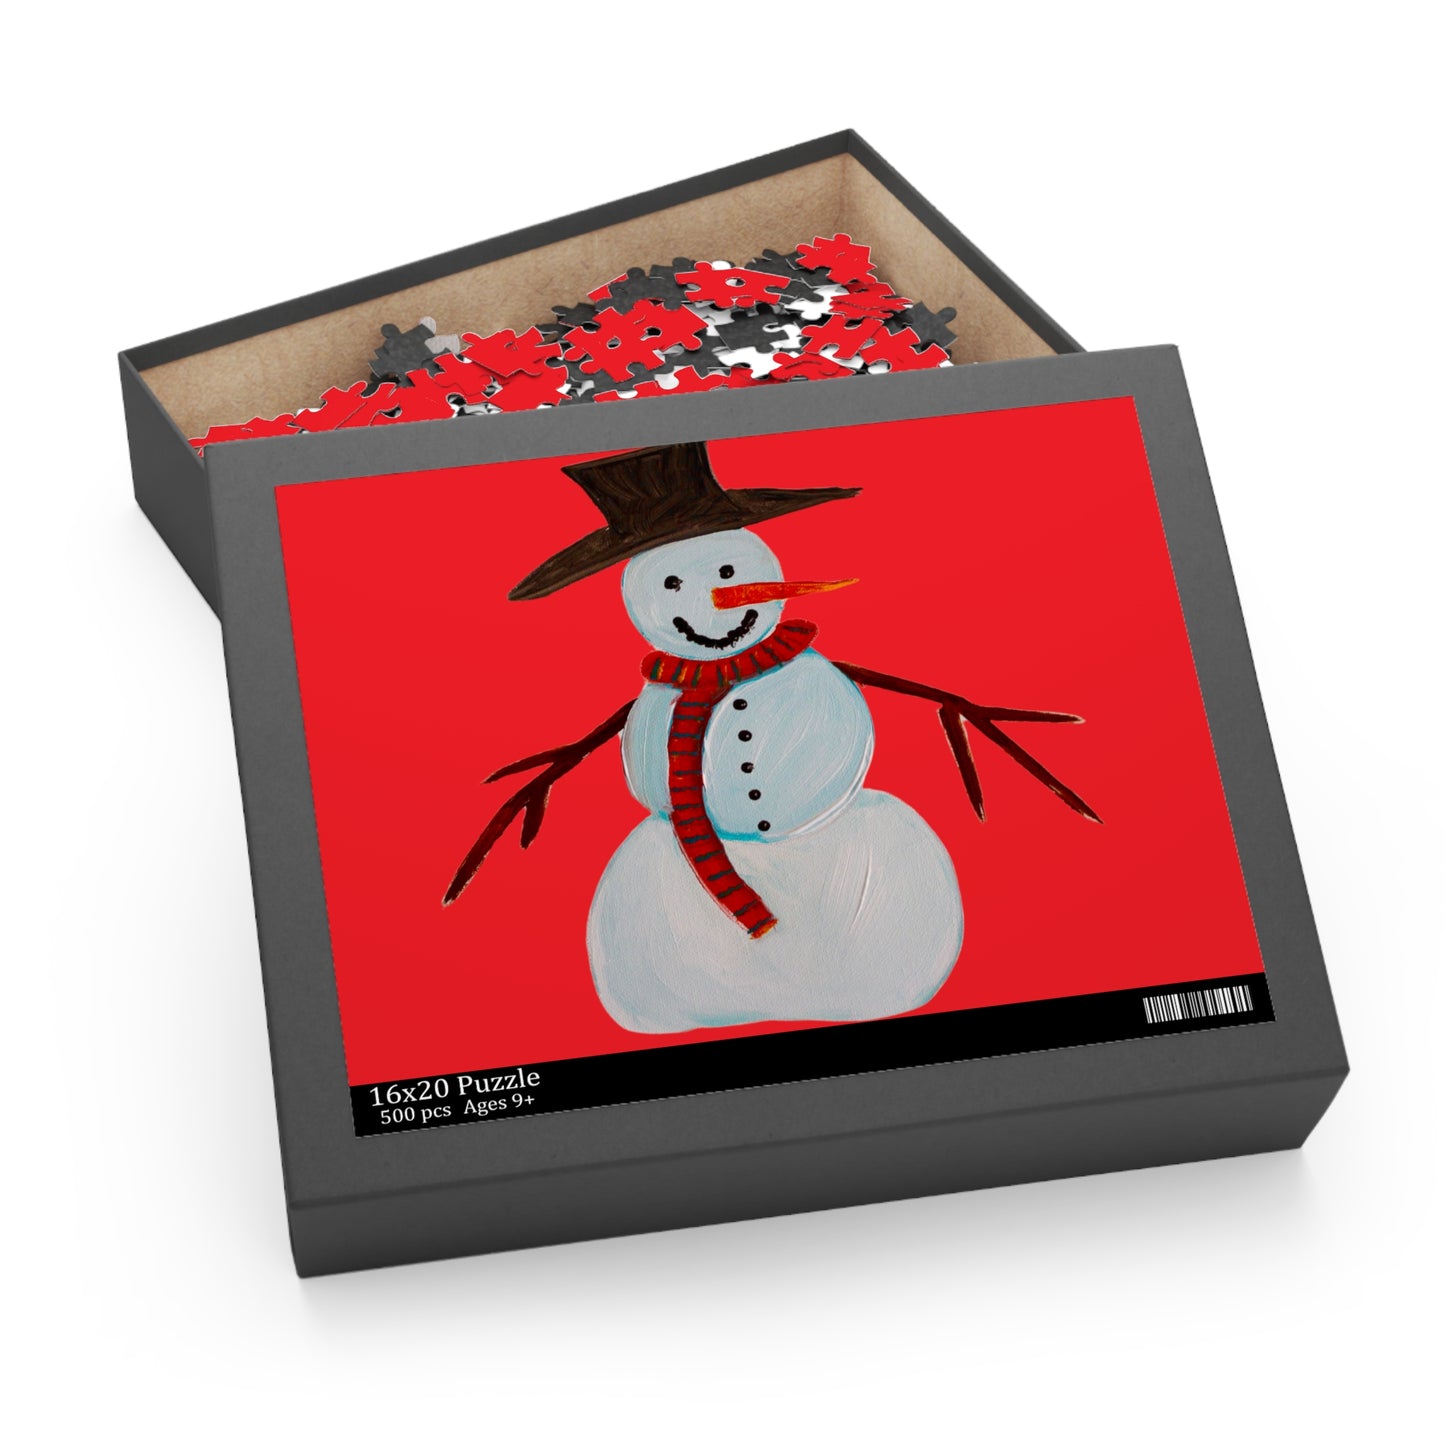 500 piece Holiday Jigsaw Puzzle - Snowman Puzzle - Jigsaw - Jigsaw puzzle Game